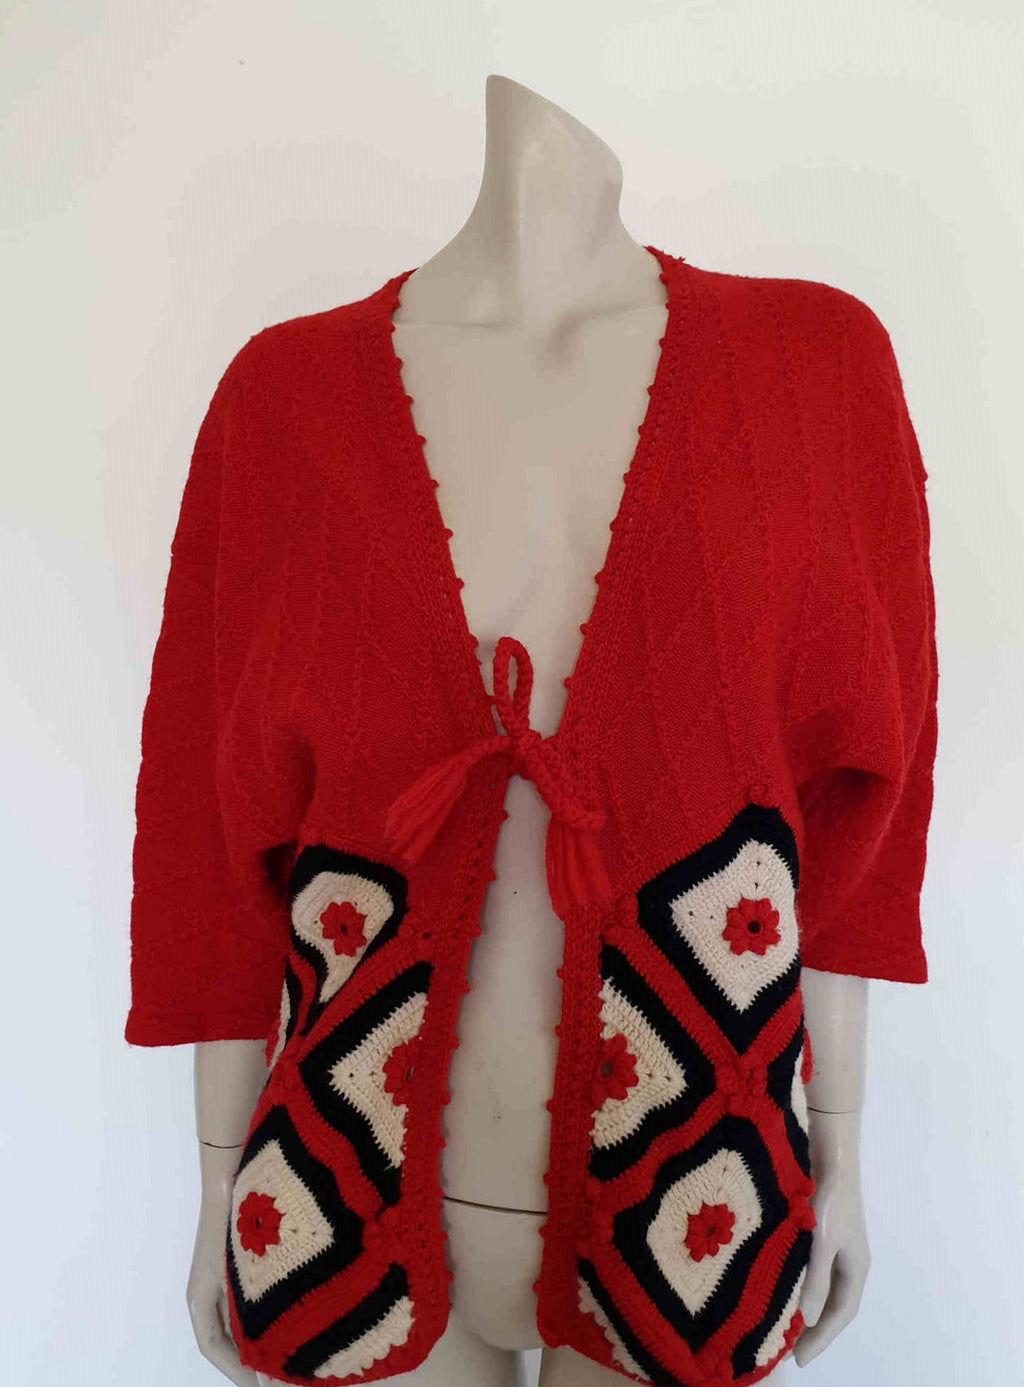 1970s vintage red wool knit cardigan jacket with granny squares